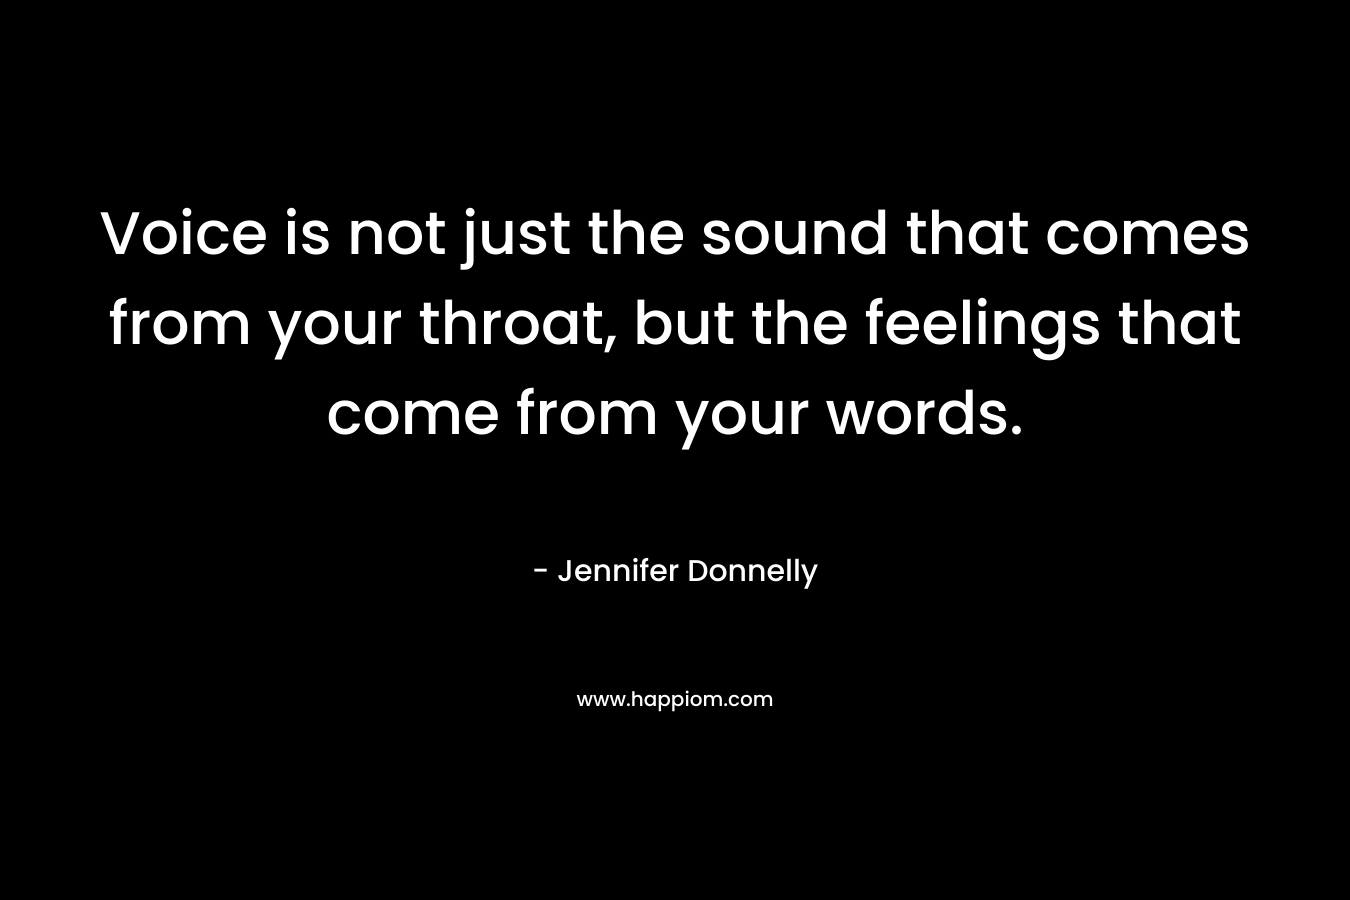 Voice is not just the sound that comes from your throat, but the feelings that come from your words. – Jennifer Donnelly